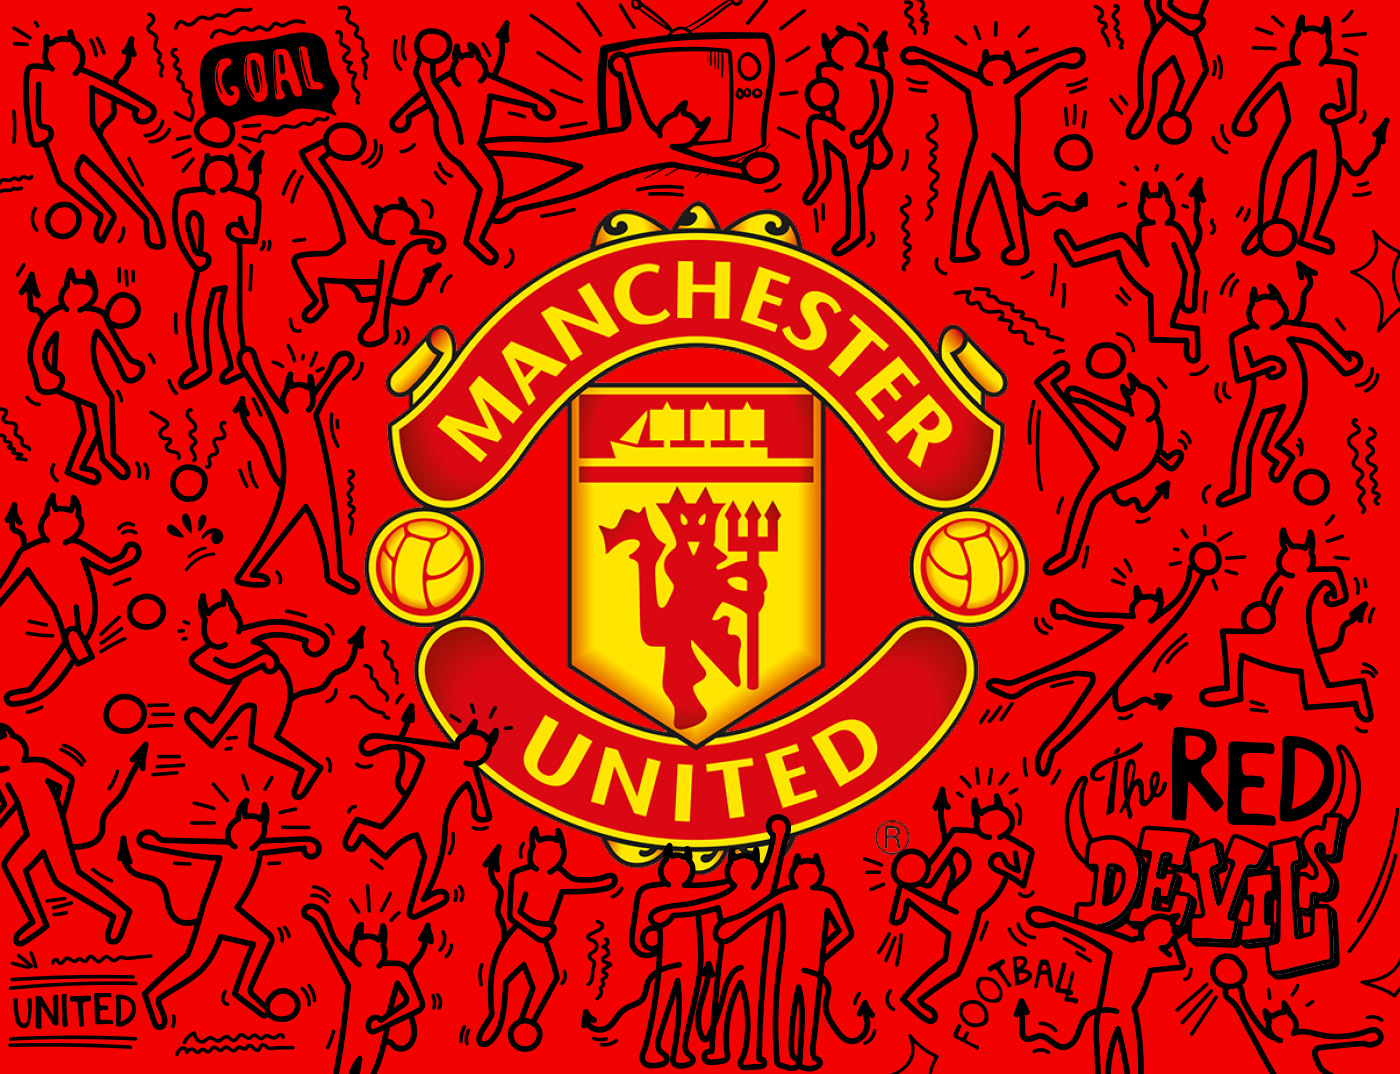 Advertising  color colorful composition creative digital illustration football Manchester United Premier League soccer